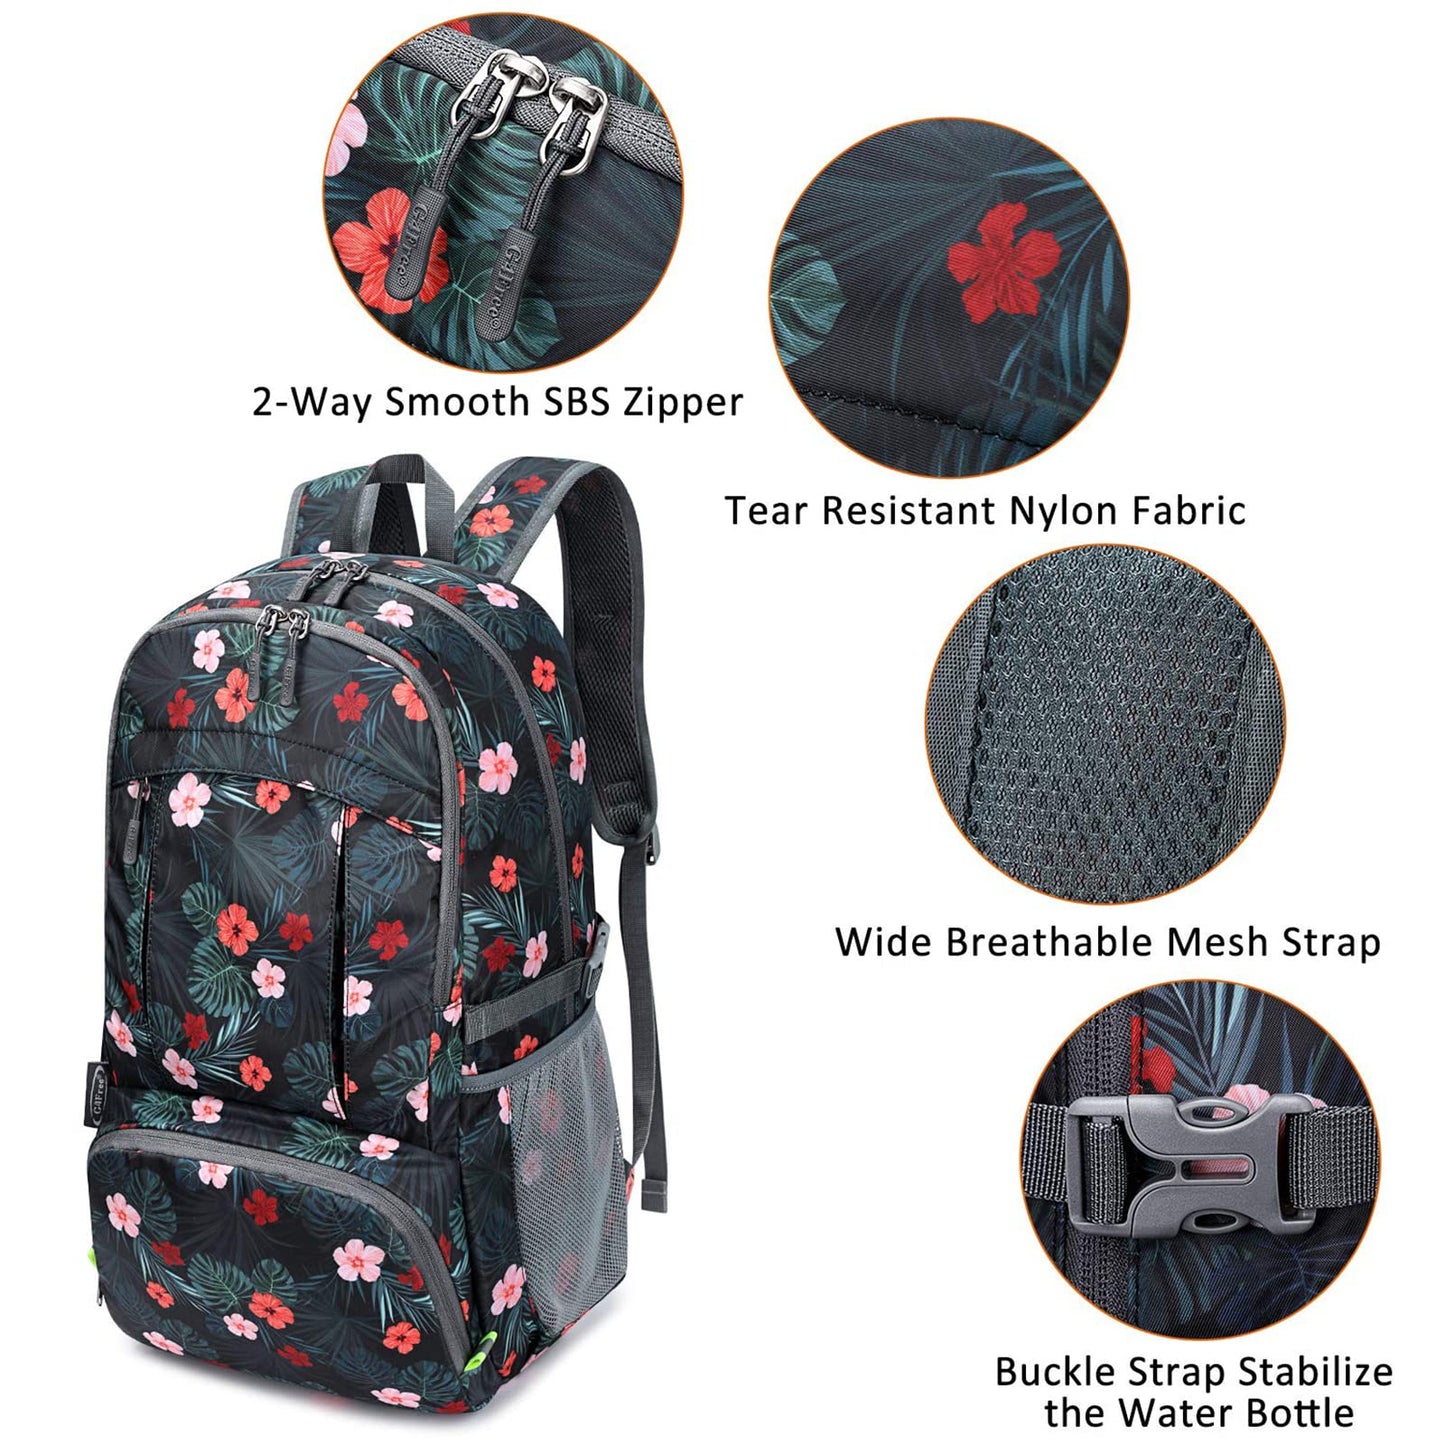 G4Free 40L Lightweight Packable Hiking Backpack